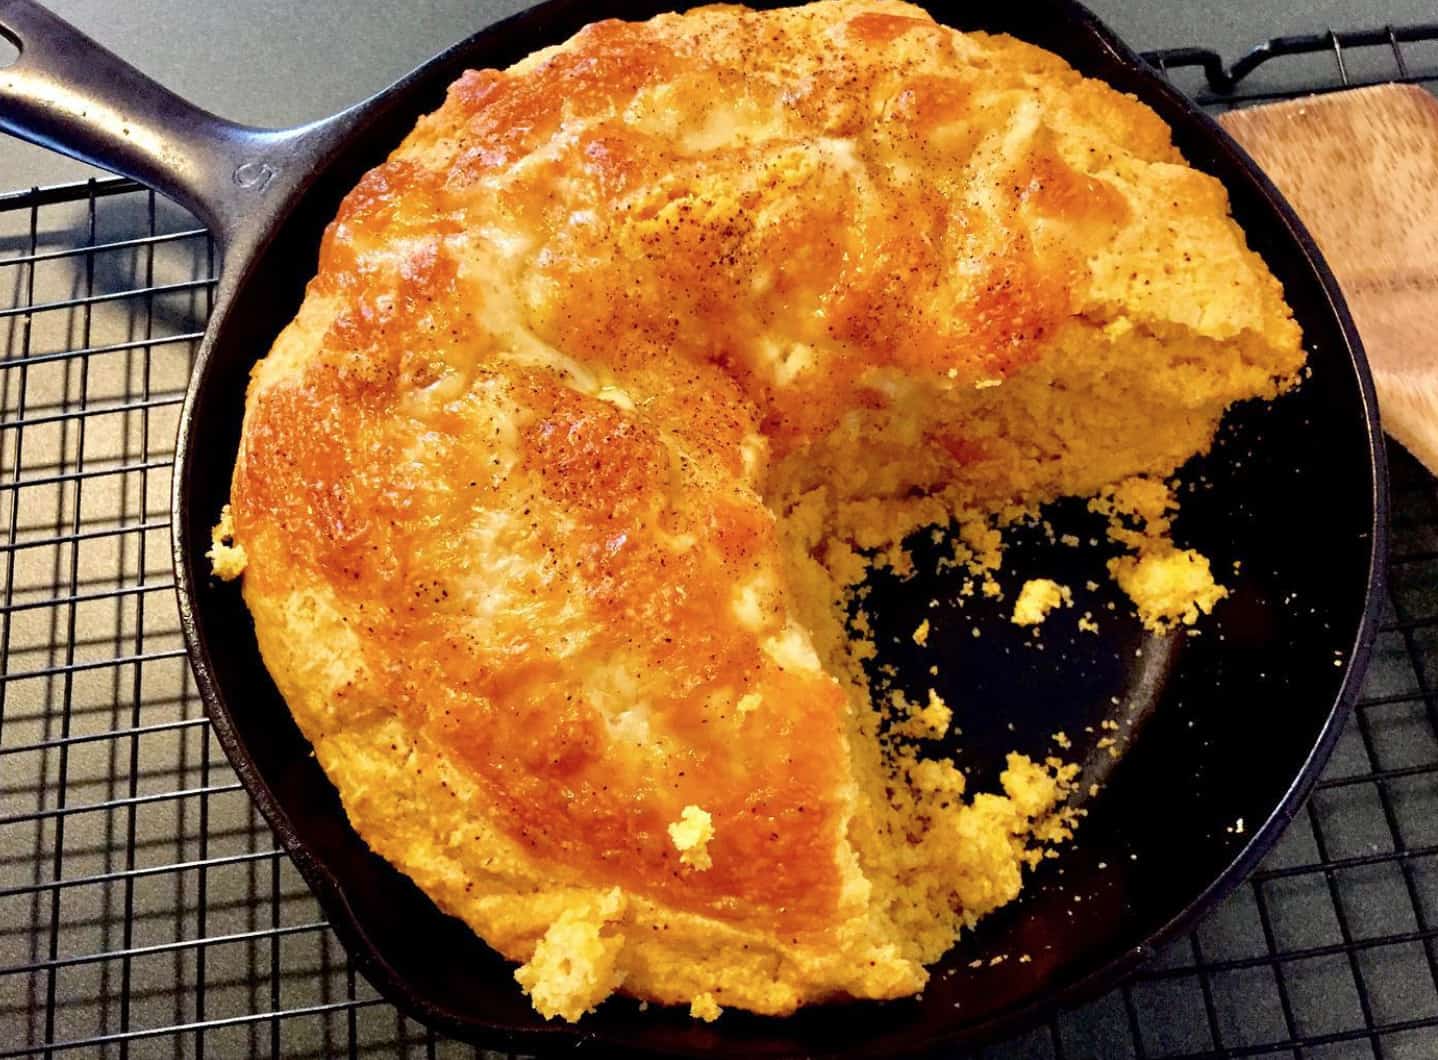 Bohemian Nouveaux corn bread cools in a skillet. Press photo courtesy of the artist